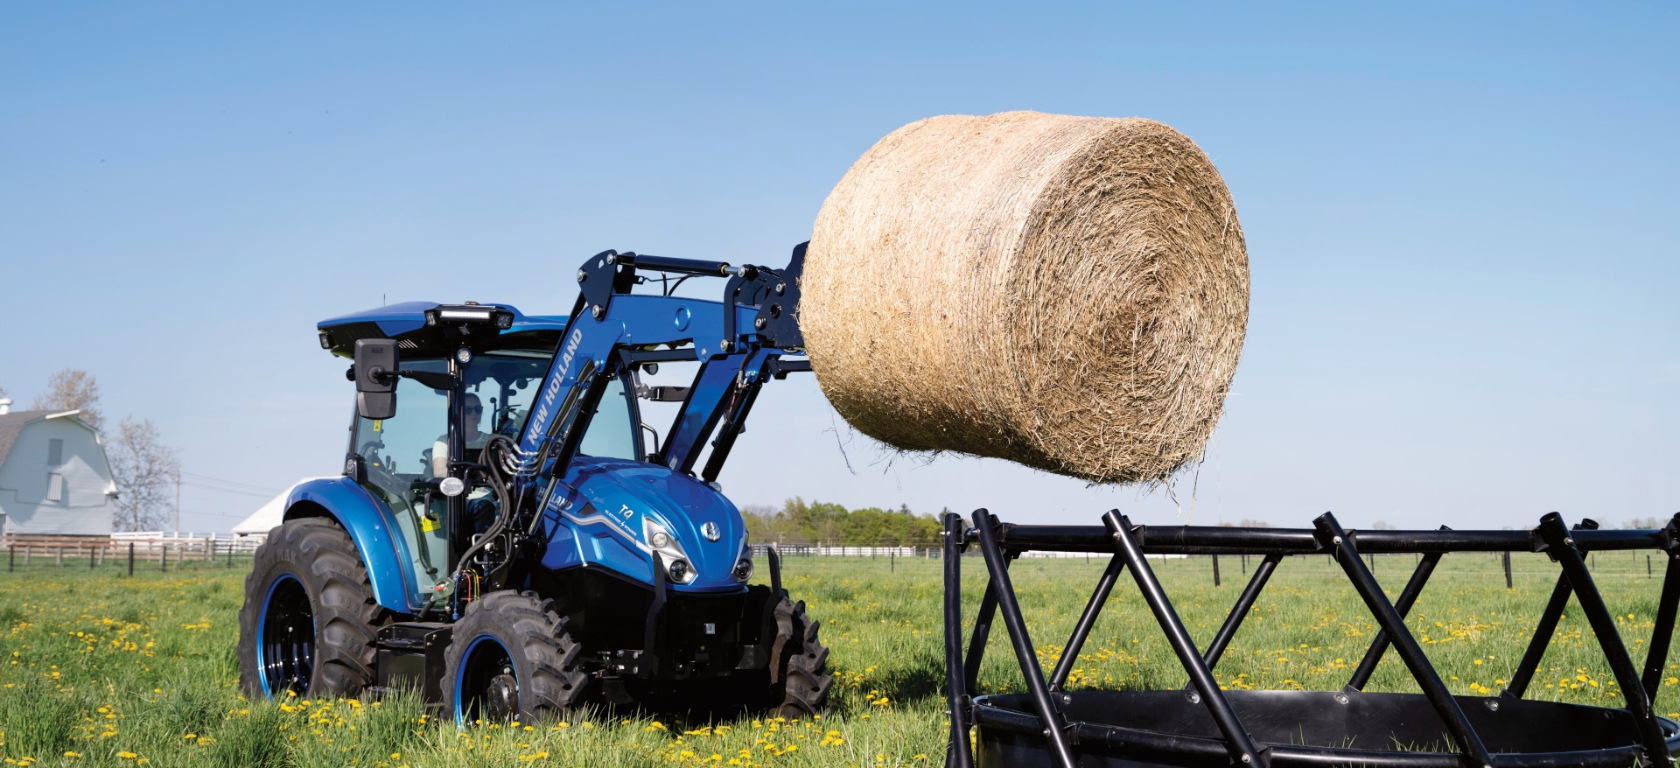 T4 Electric Tractor holding a bale